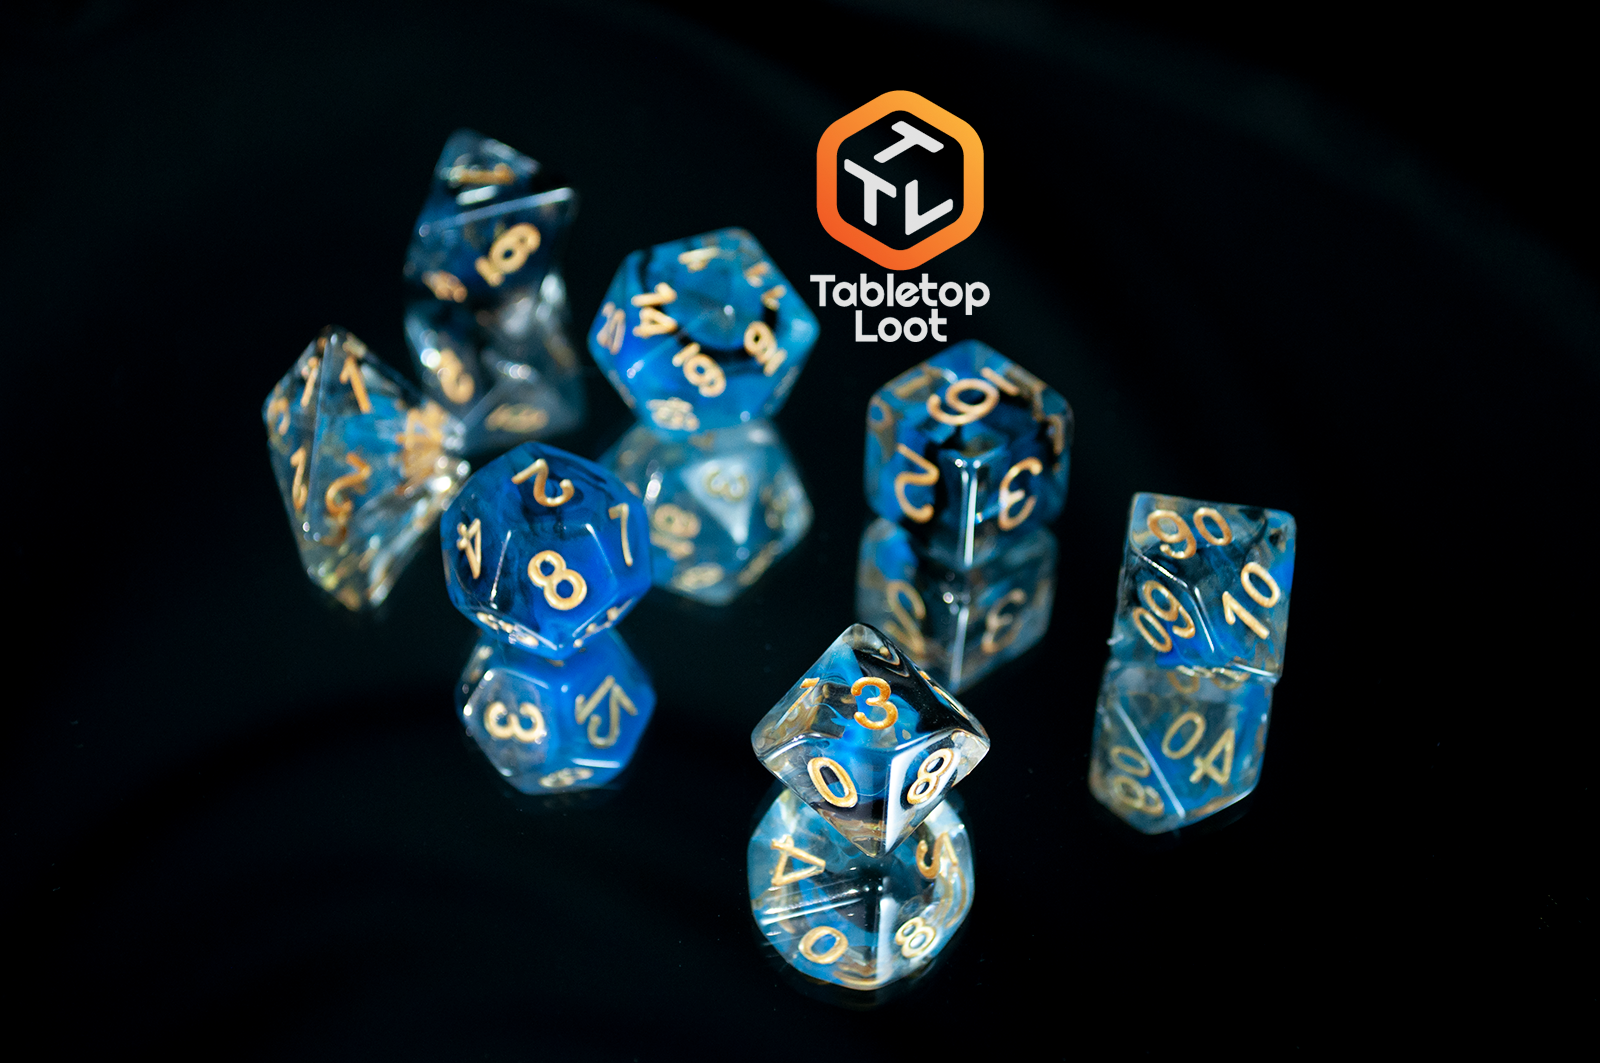 The Arcane Eye 7 piece dice set from Tabletop Loot with swirls of blue and black in clear dice and gold numbering.